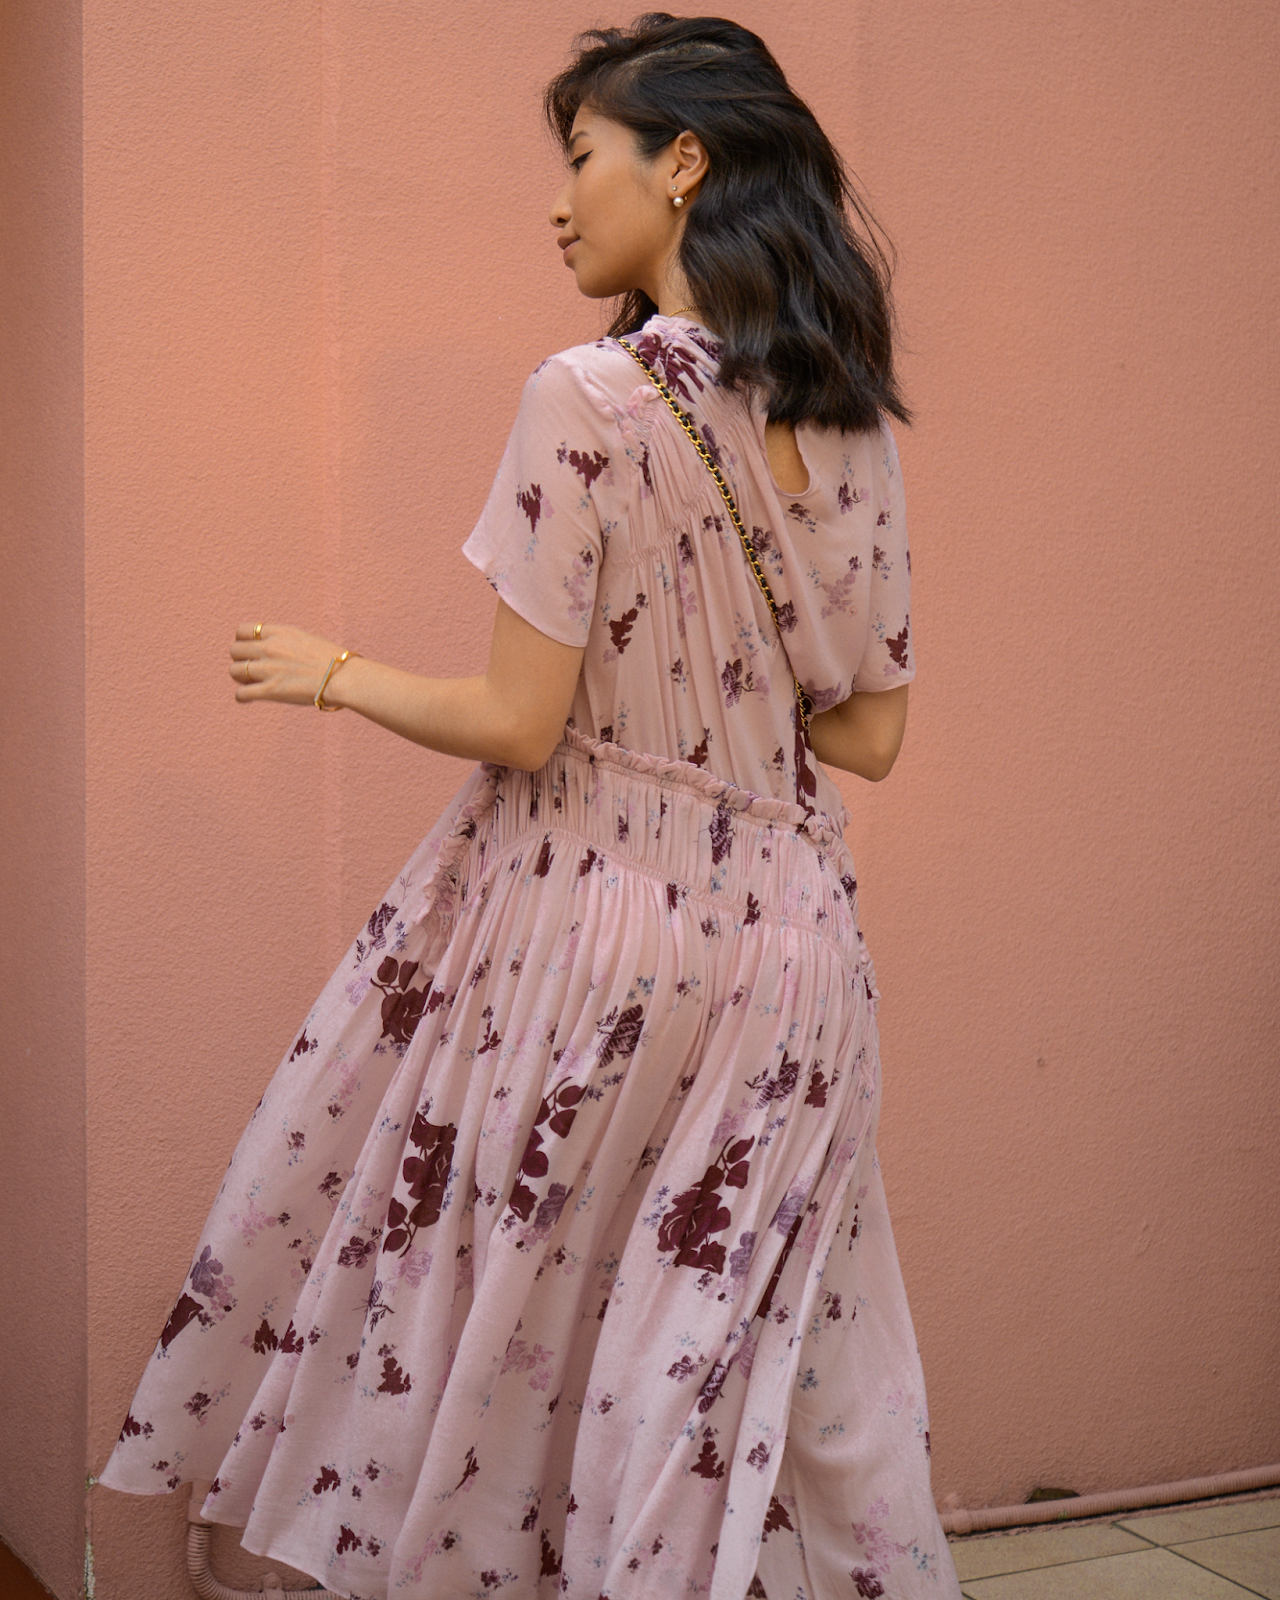 Preen line dress, asymmetric pink dress, After Quarter-Life / 082019 - August Superpost on life after 25, outfits and travels by Van Le / FOREVERVANNY.com